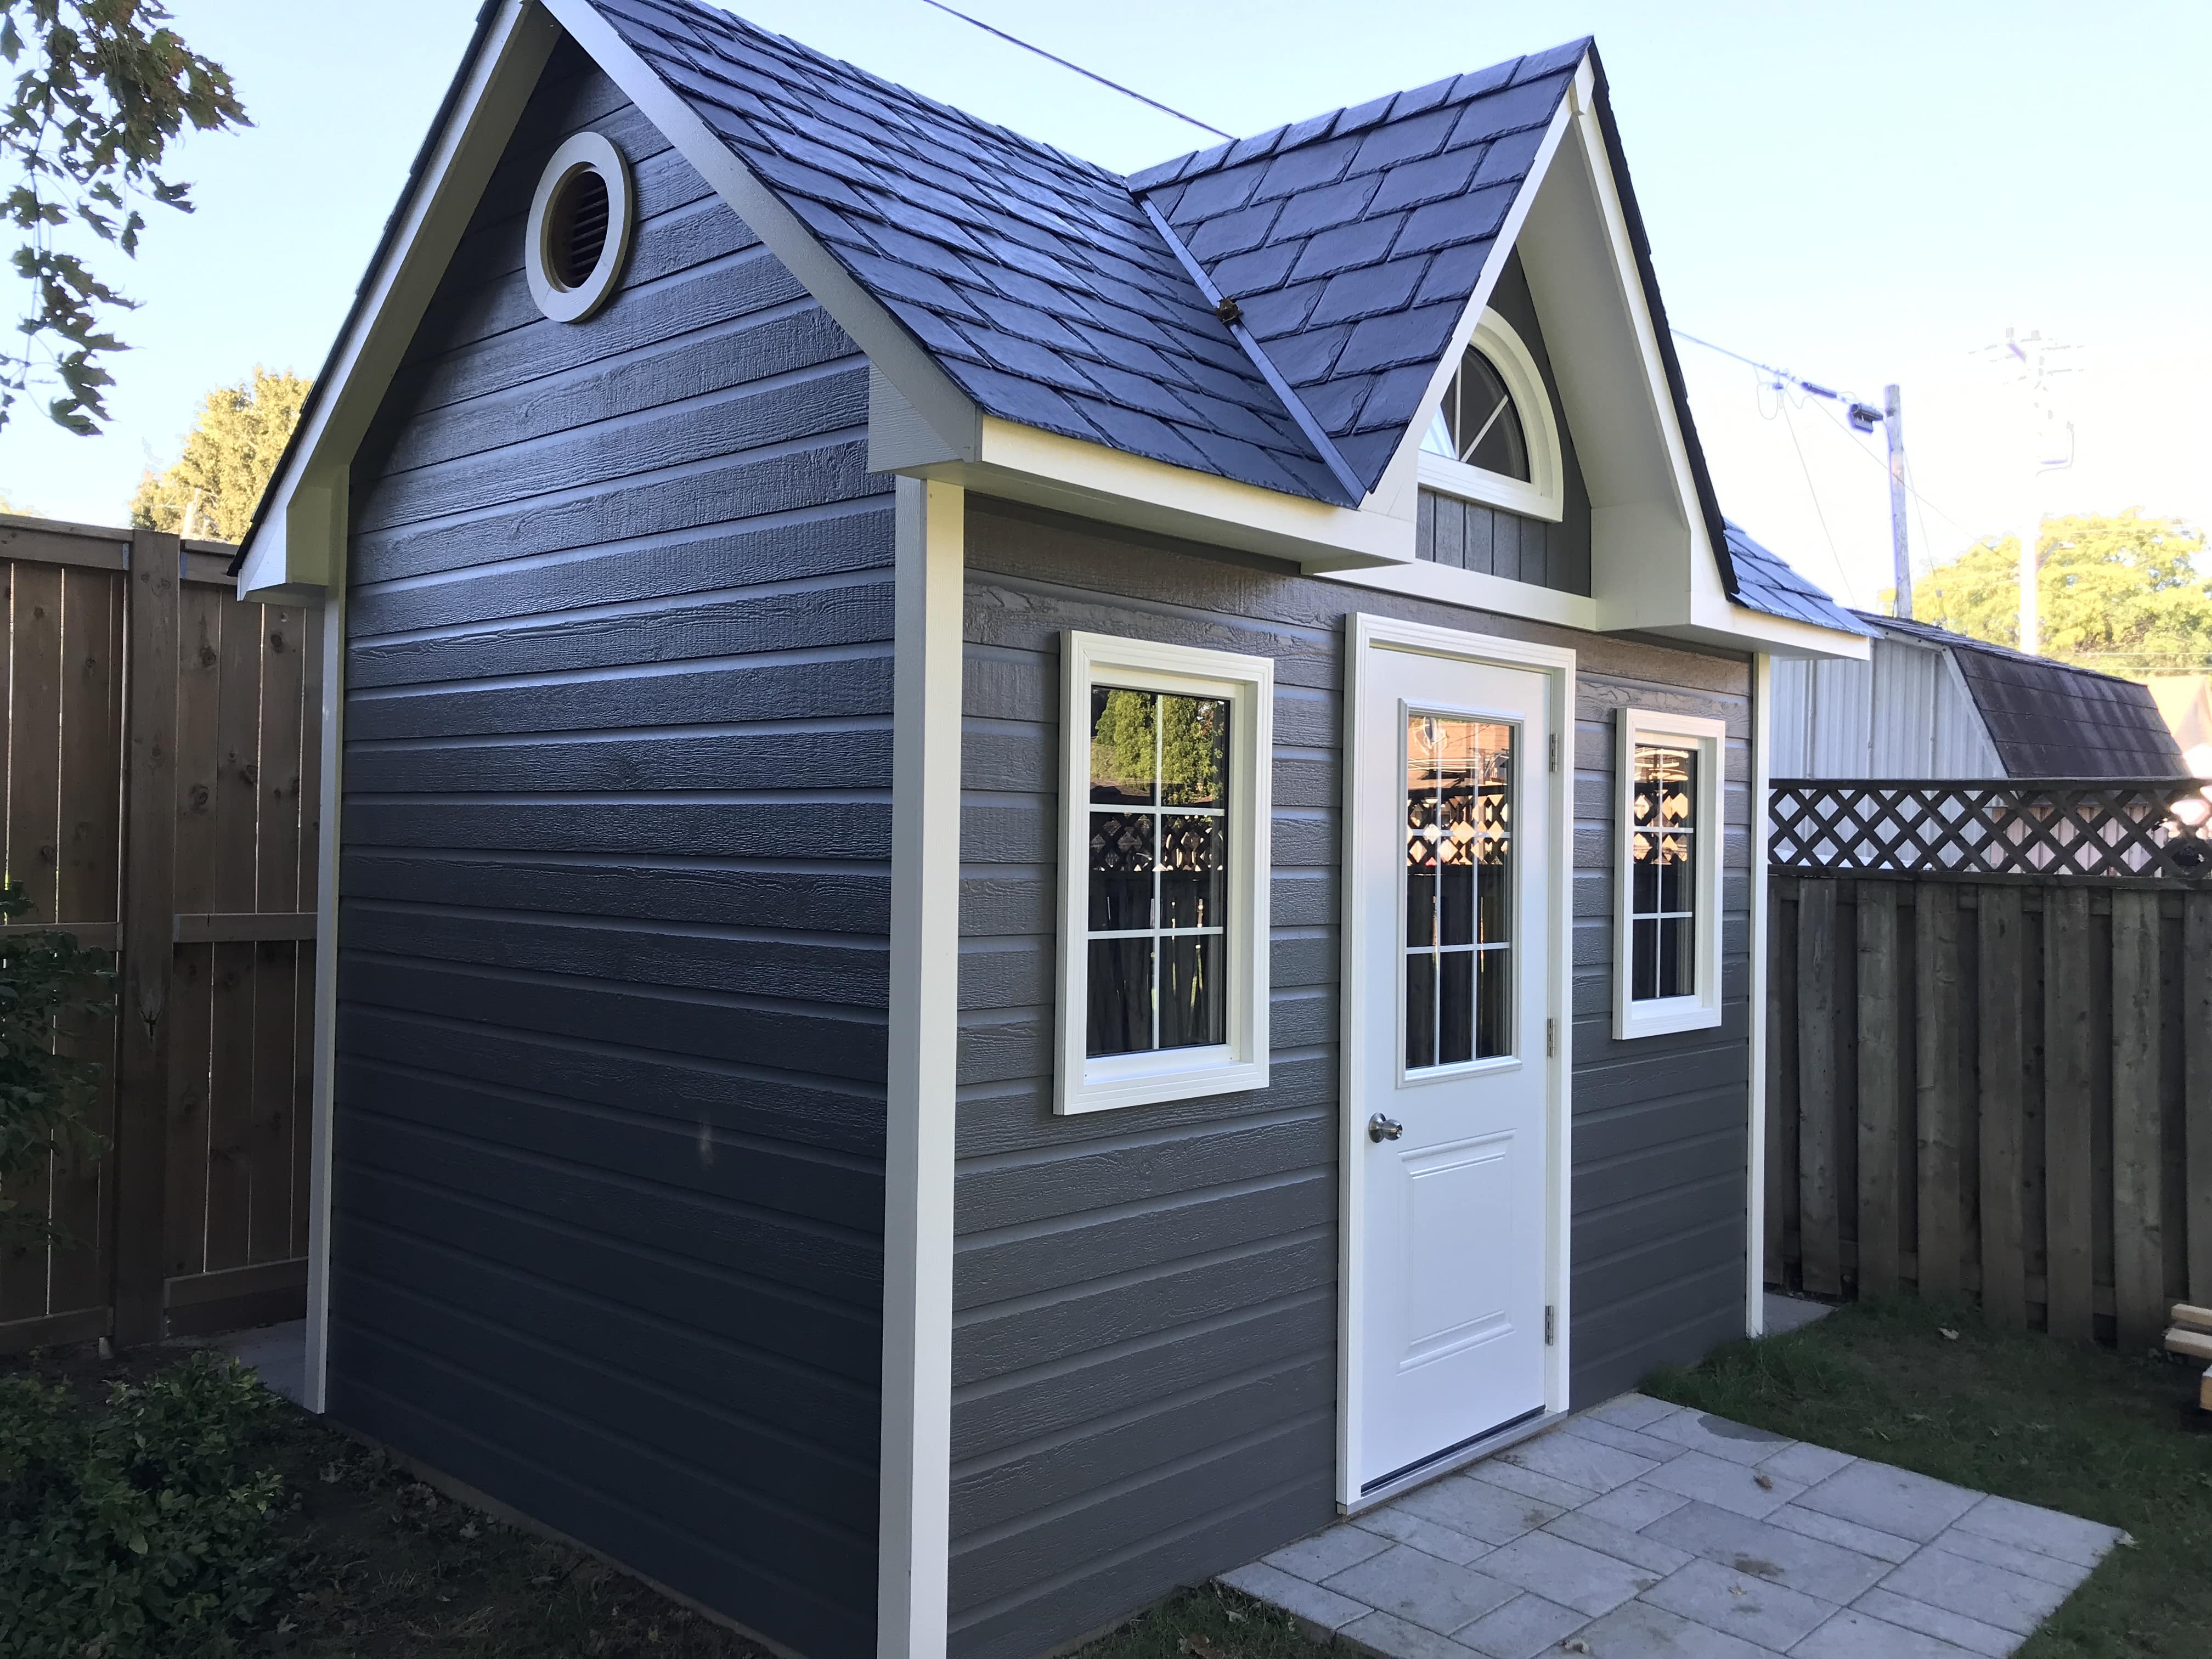 Side view of 8’ x 12' Copper Creek Garden Shed located in Grimsby, Ontario – Summerwood Products